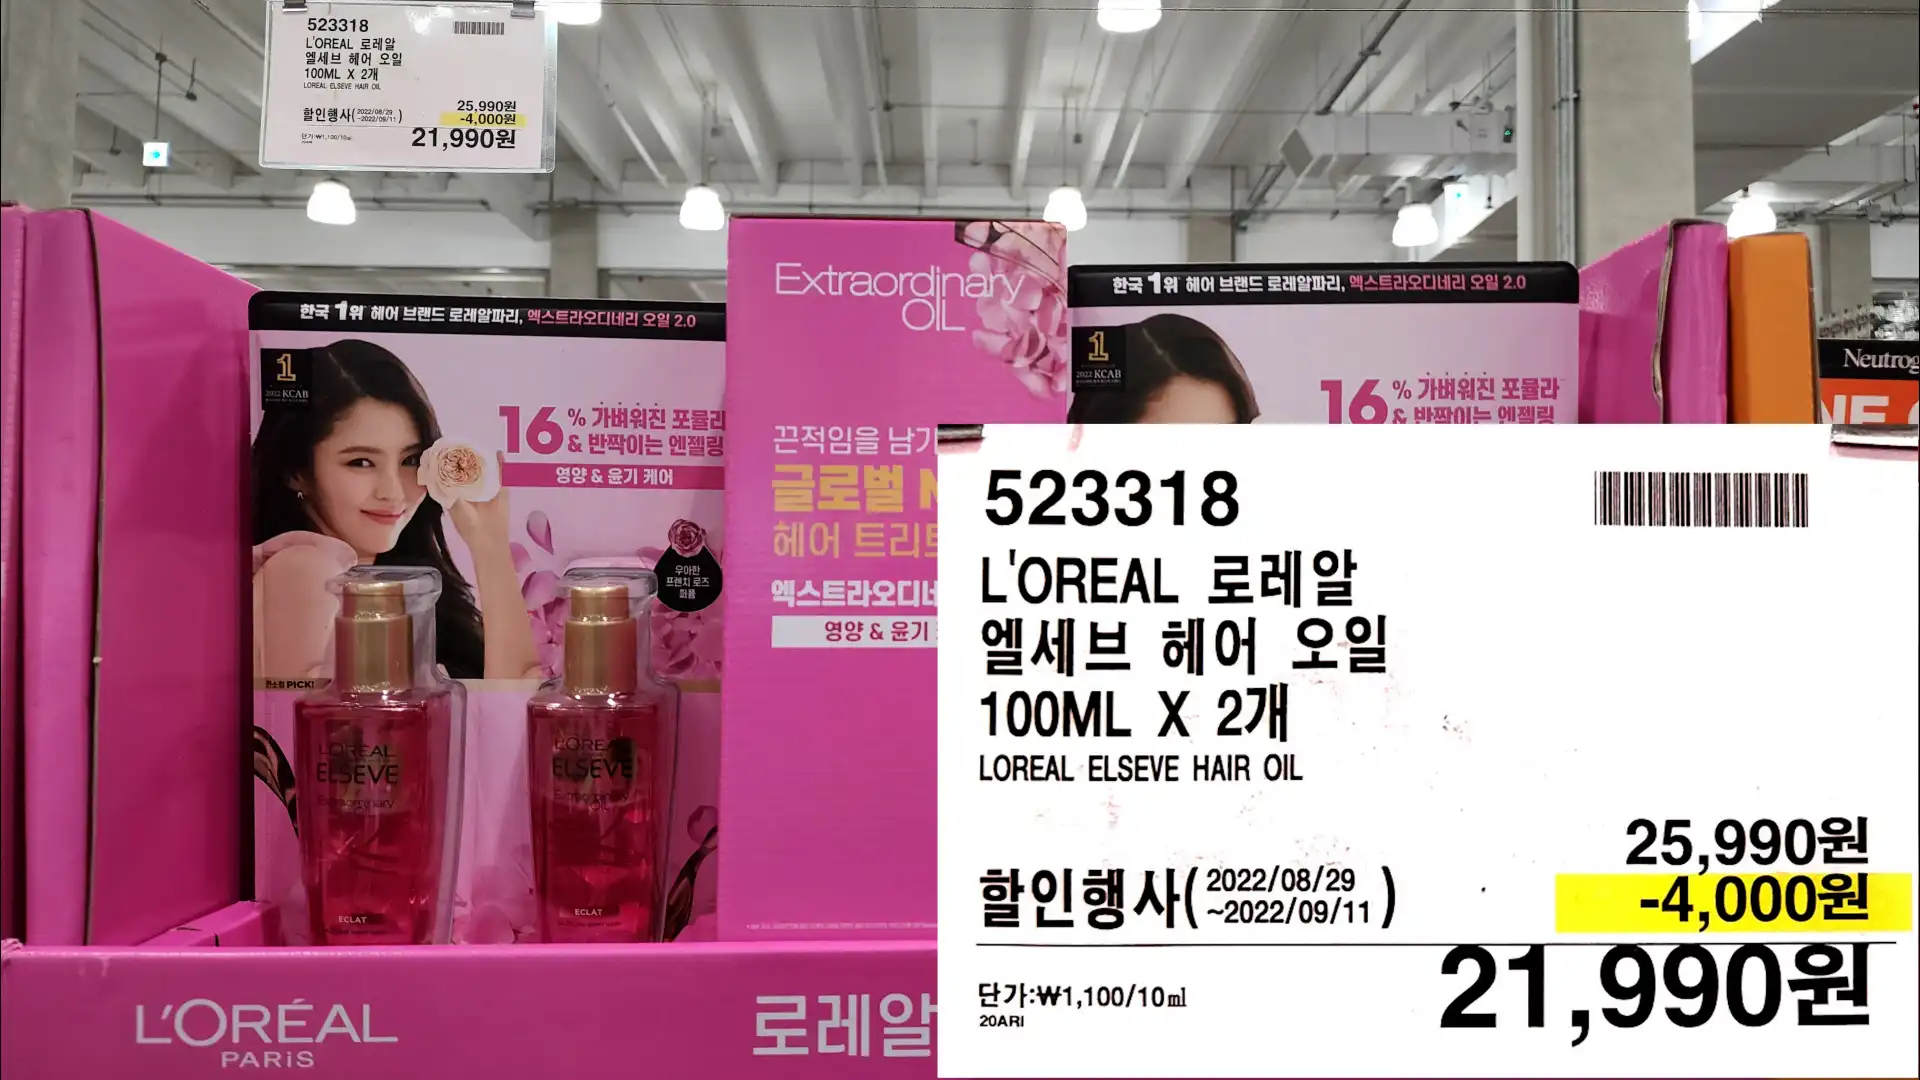 L'OREAL 로레알
엘세브 헤어 오일
100ML X 2개
LOREAL ELSEVE HAIR OIL
21,990원